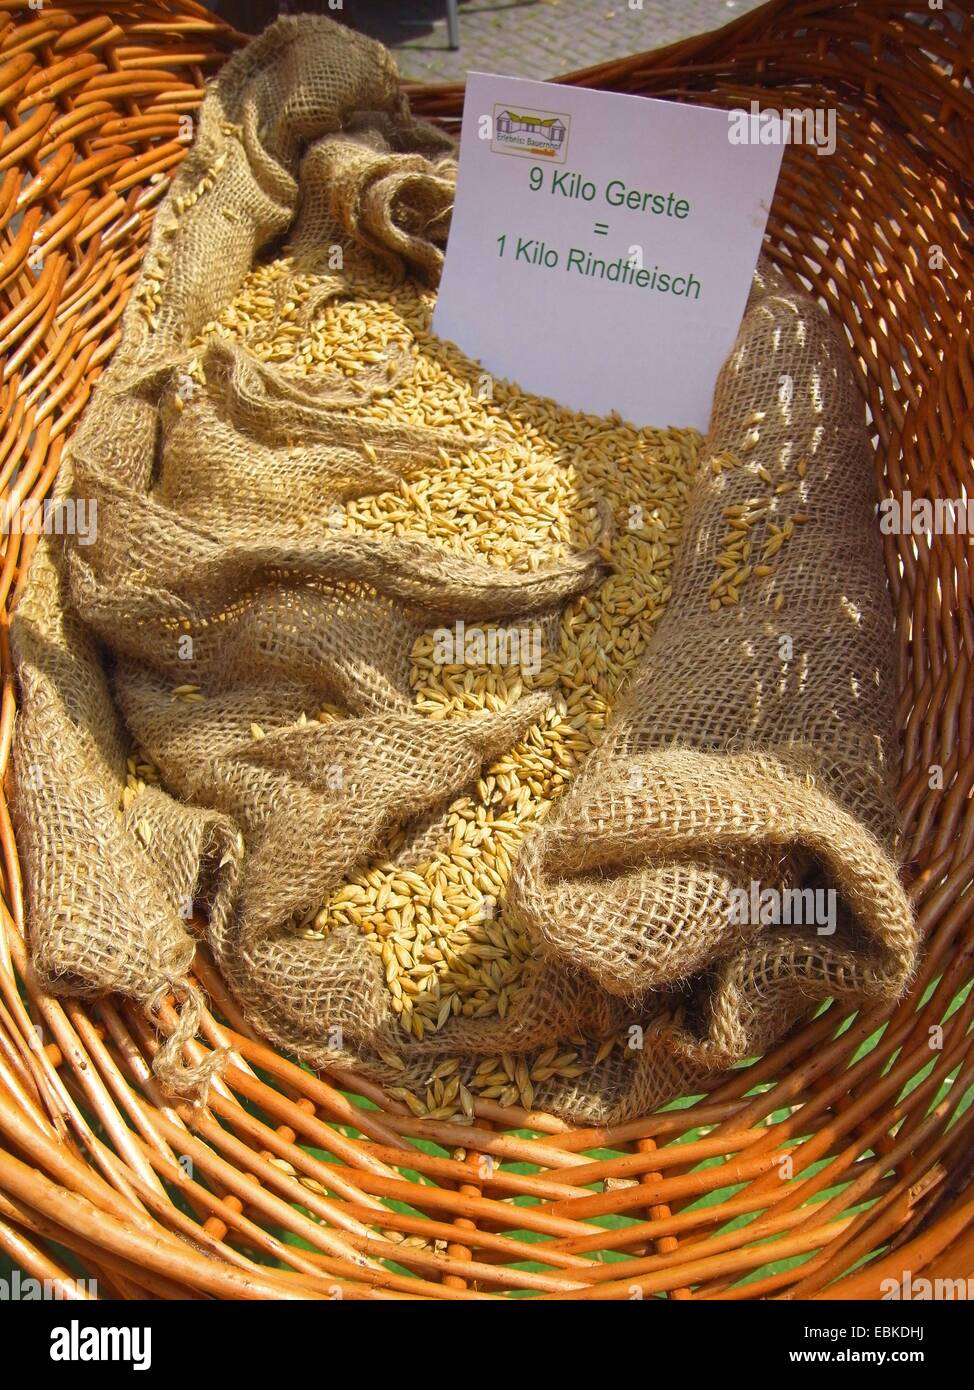 visualization of the energy requirement for meat production: 9 kg barley in a basket - the amount needed for 1 kg of beef Stock Photo